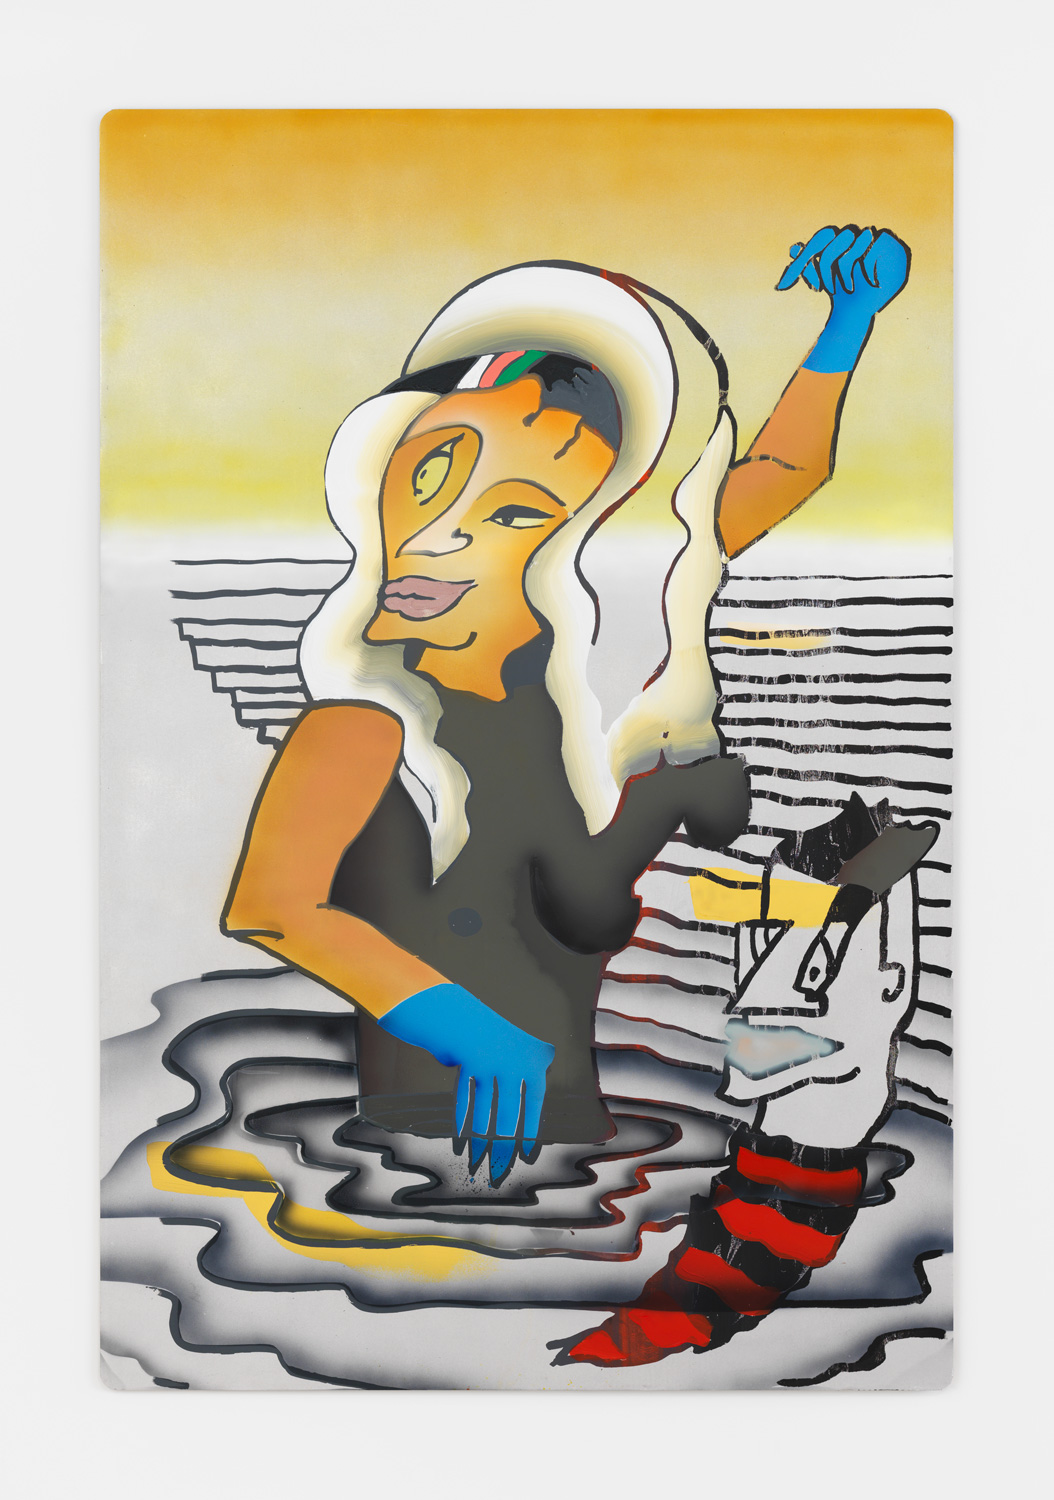 Melissa Brown, The Fool, 2016, acrylic, flashe, oil, resin, and silkscreen on corrugated aluminum, 60h x 40w in.